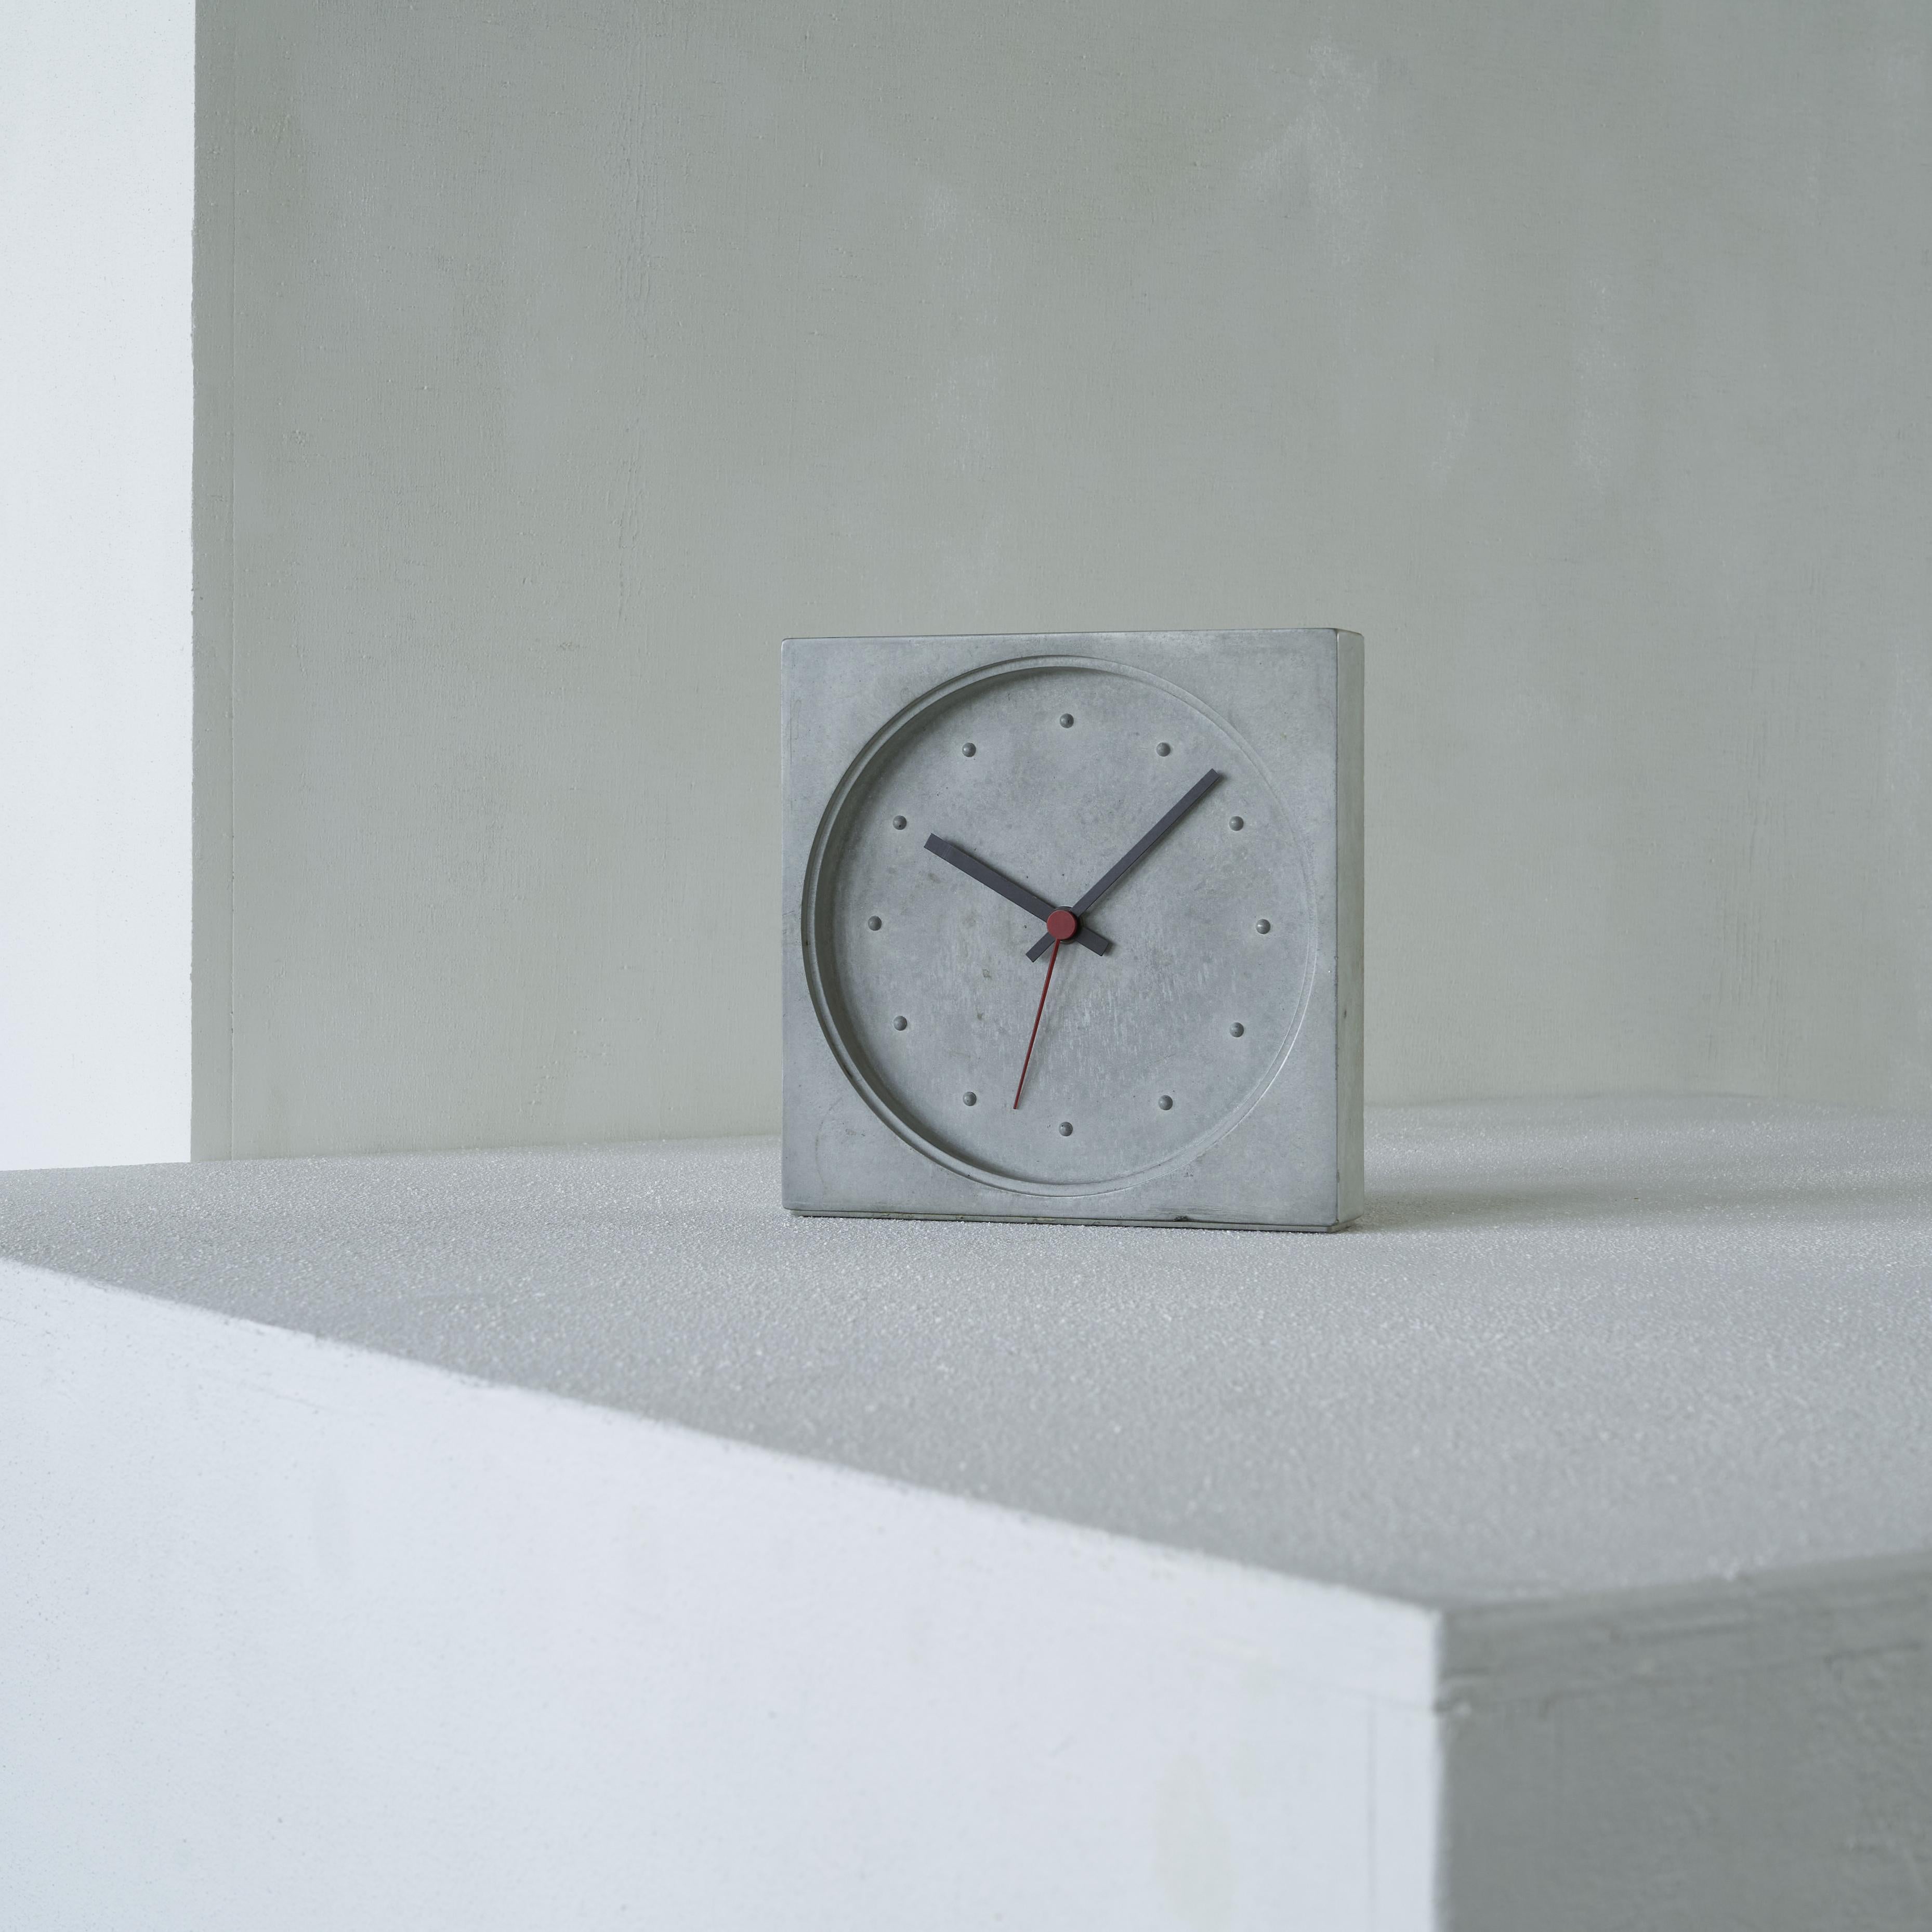 Danese Milano Kuno prey concrete clock. Italy, 1986.

This is a very rare post-modern concrete clock designed by Kuno Prey for the Milanese company Danese. A very distinct and modern design which is remarkably timeless. It was designed in 1986 and